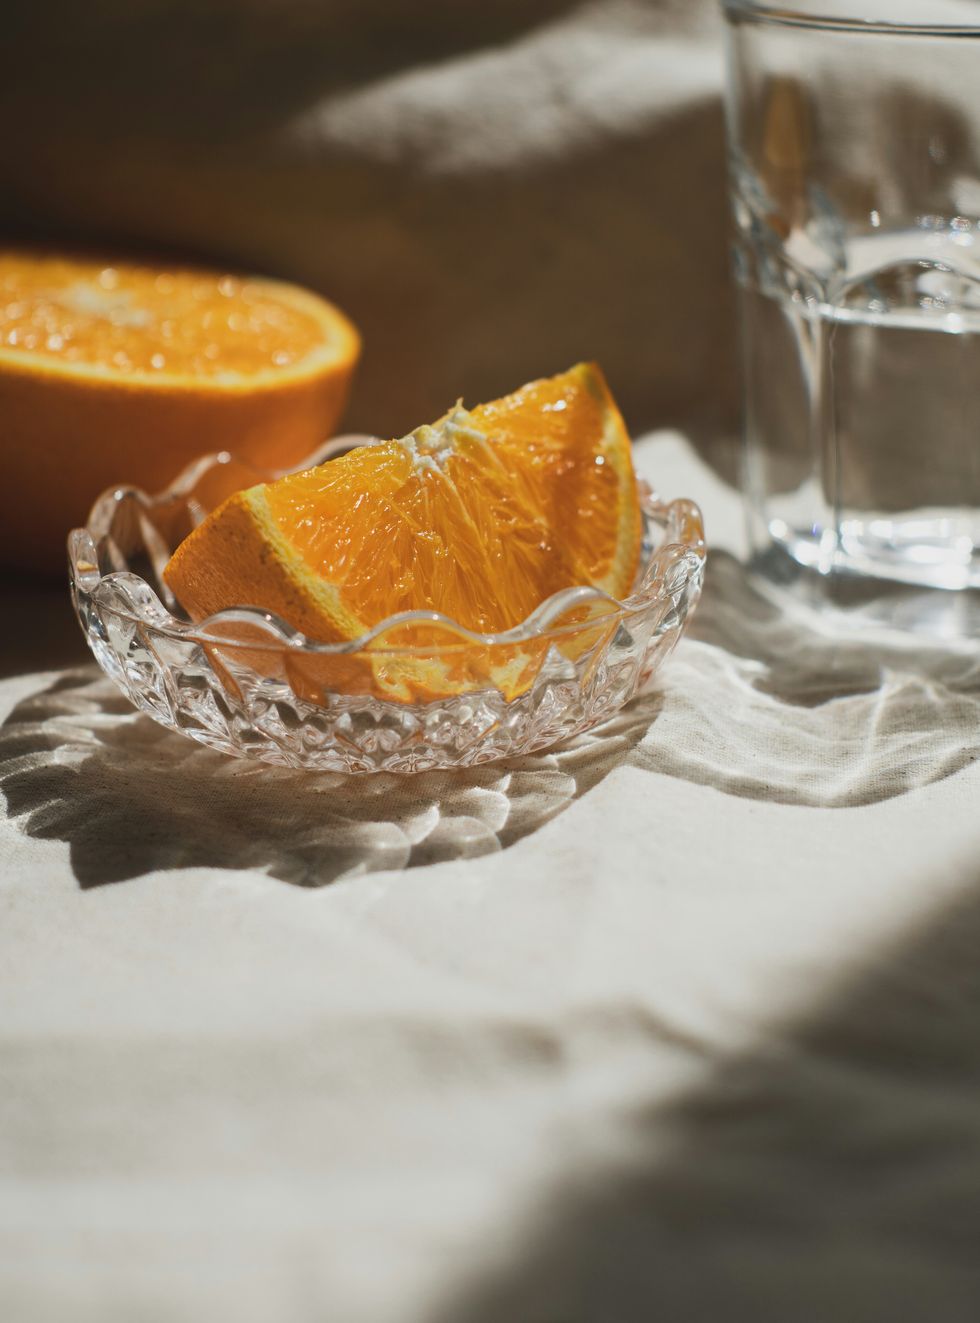 a glass of water next to a peeled orange